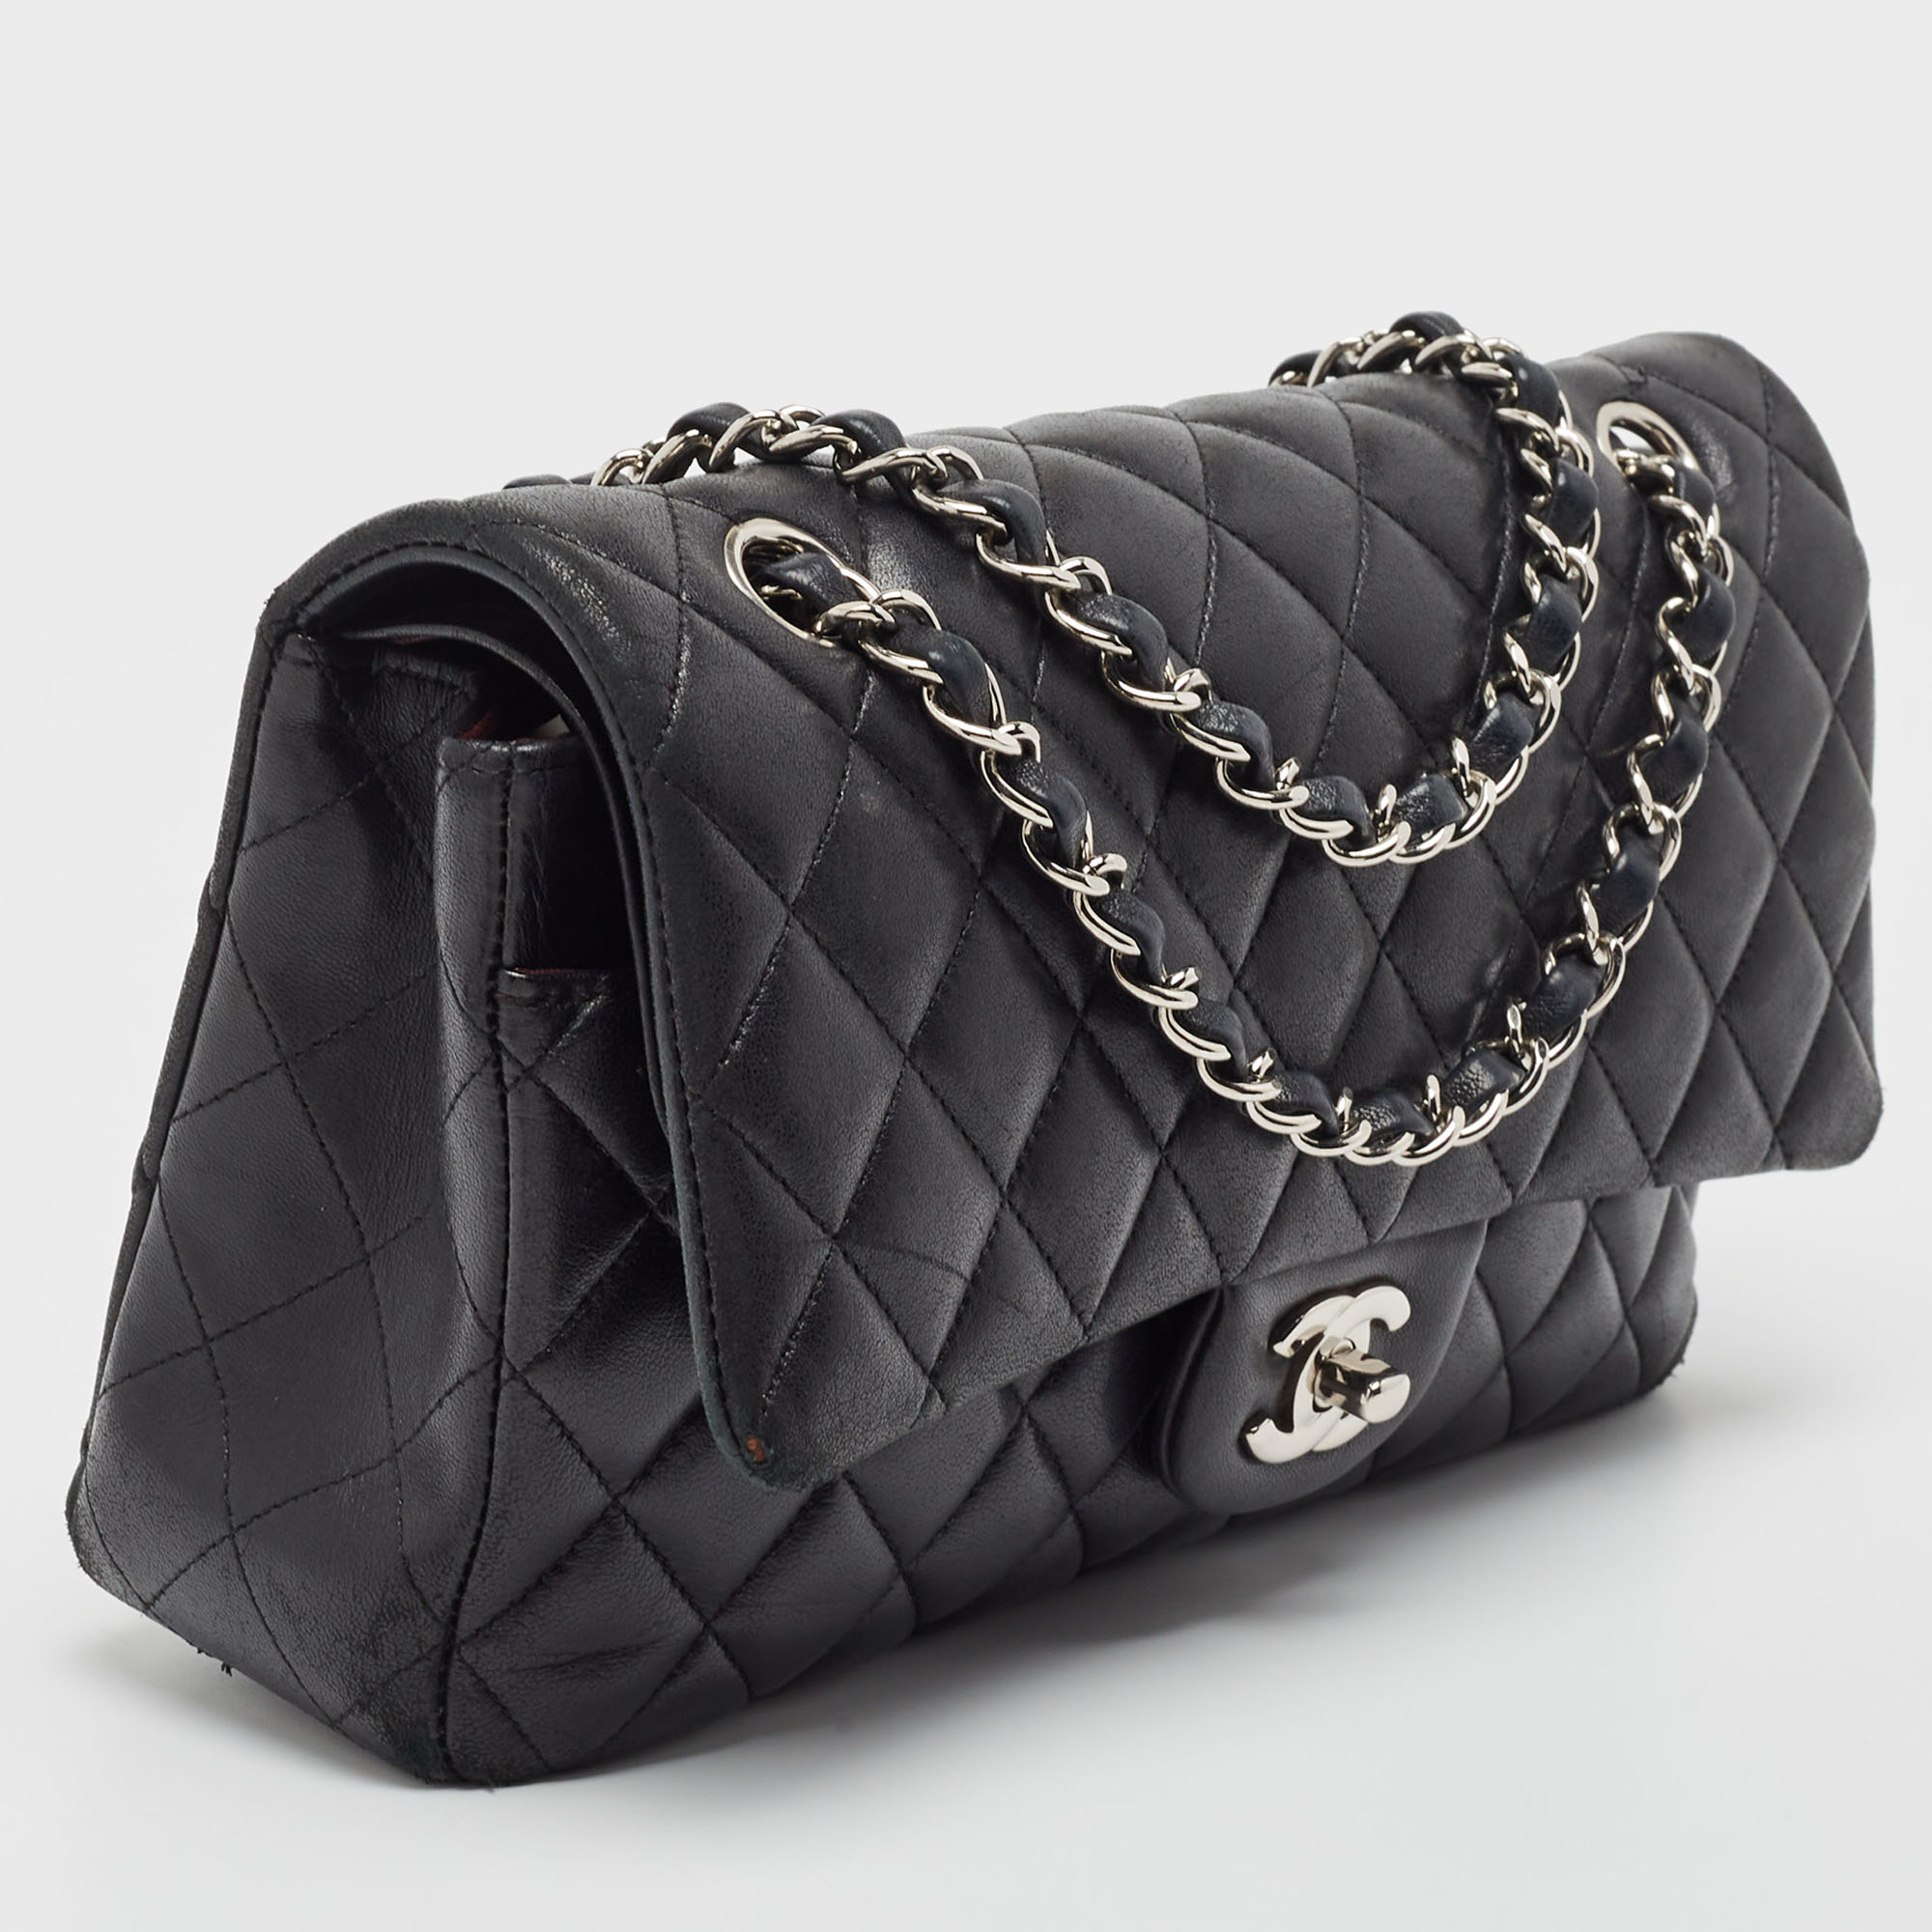 Chanel Black Quilted Leather Small CC Turnlock Full Double Flap Bag